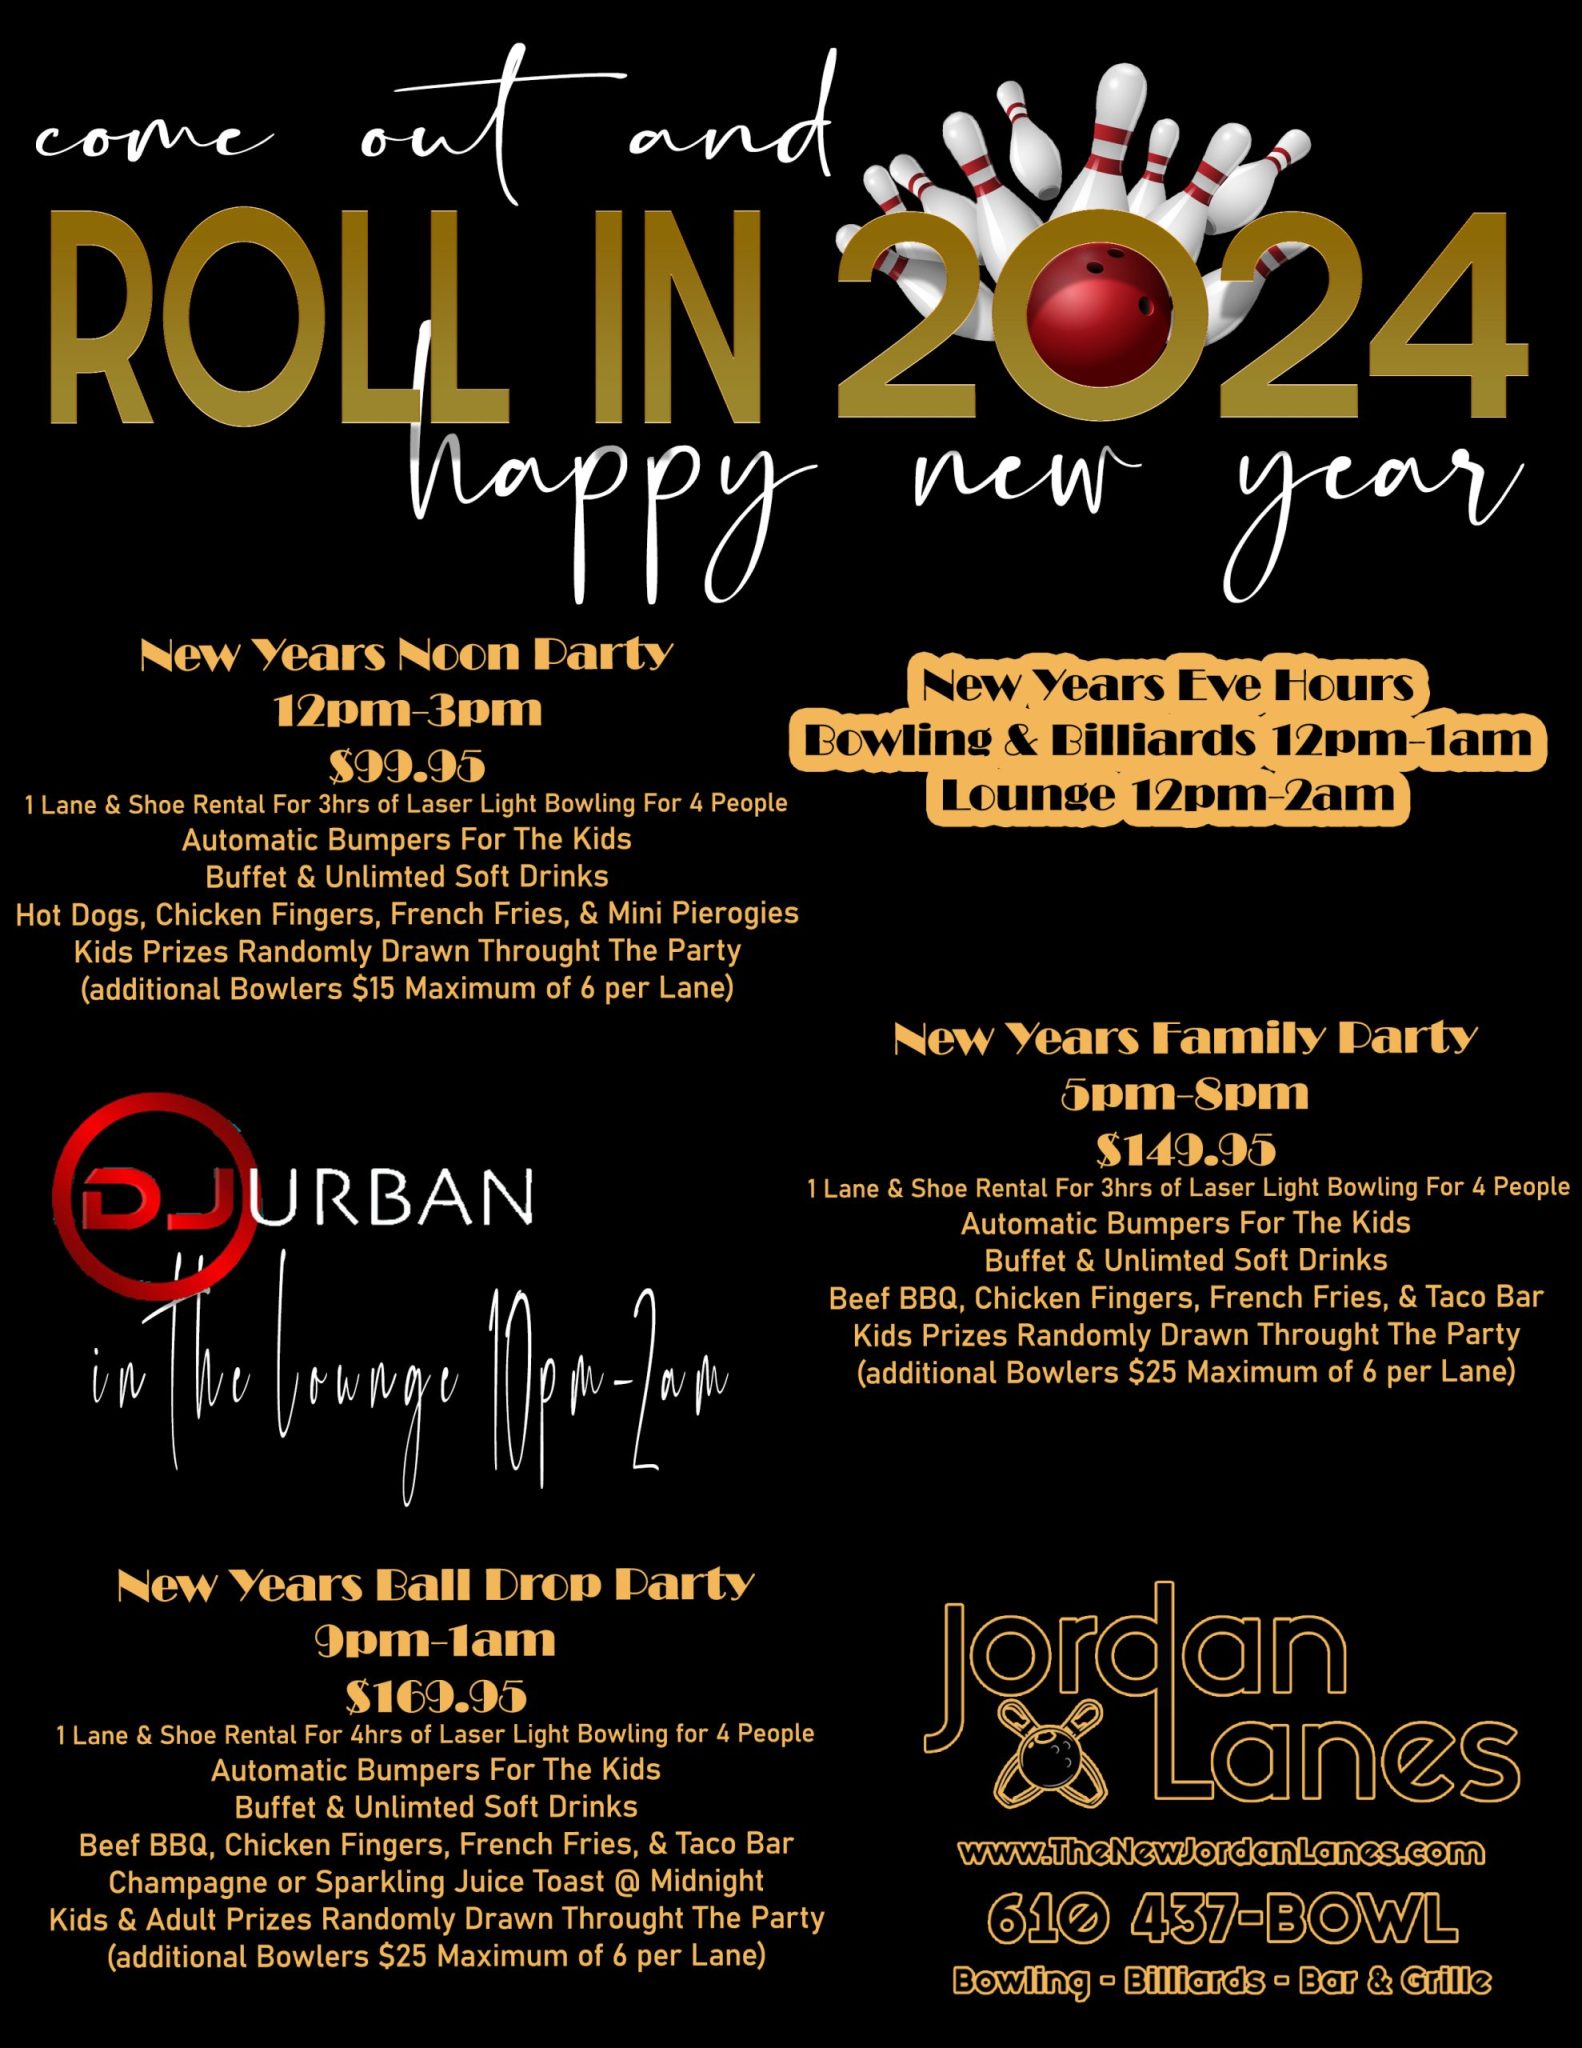 New Years Eve Parties @ The New Jordan Lanes